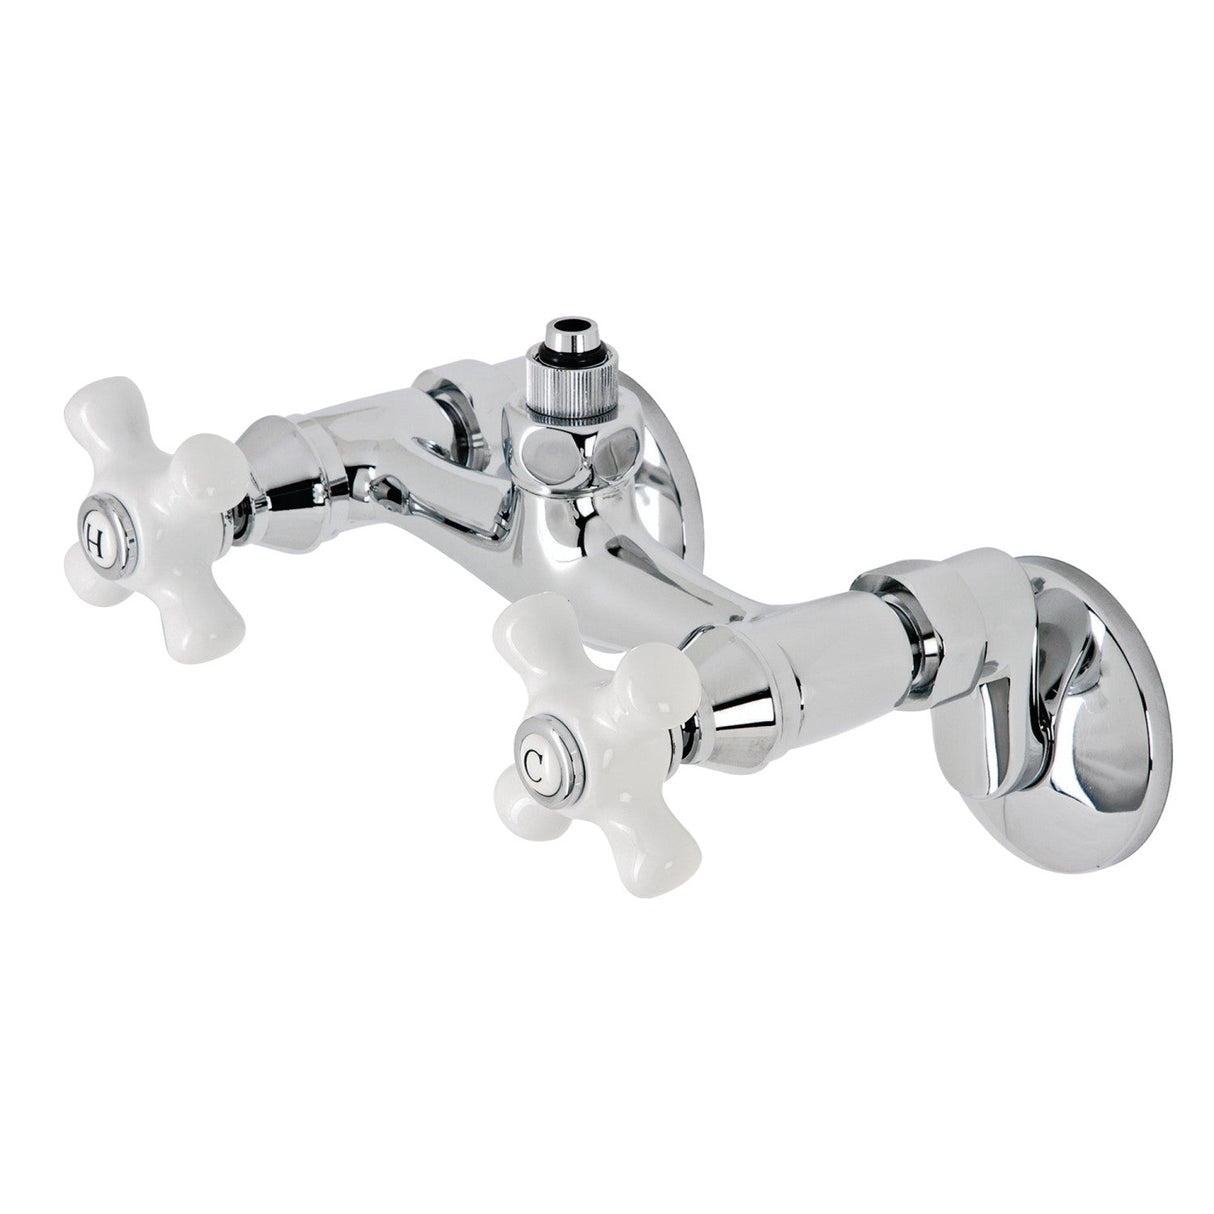 Vintage CC2131PX Wall-Mount Tub Filler Faucet with Riser Adapter, Polished Chrome